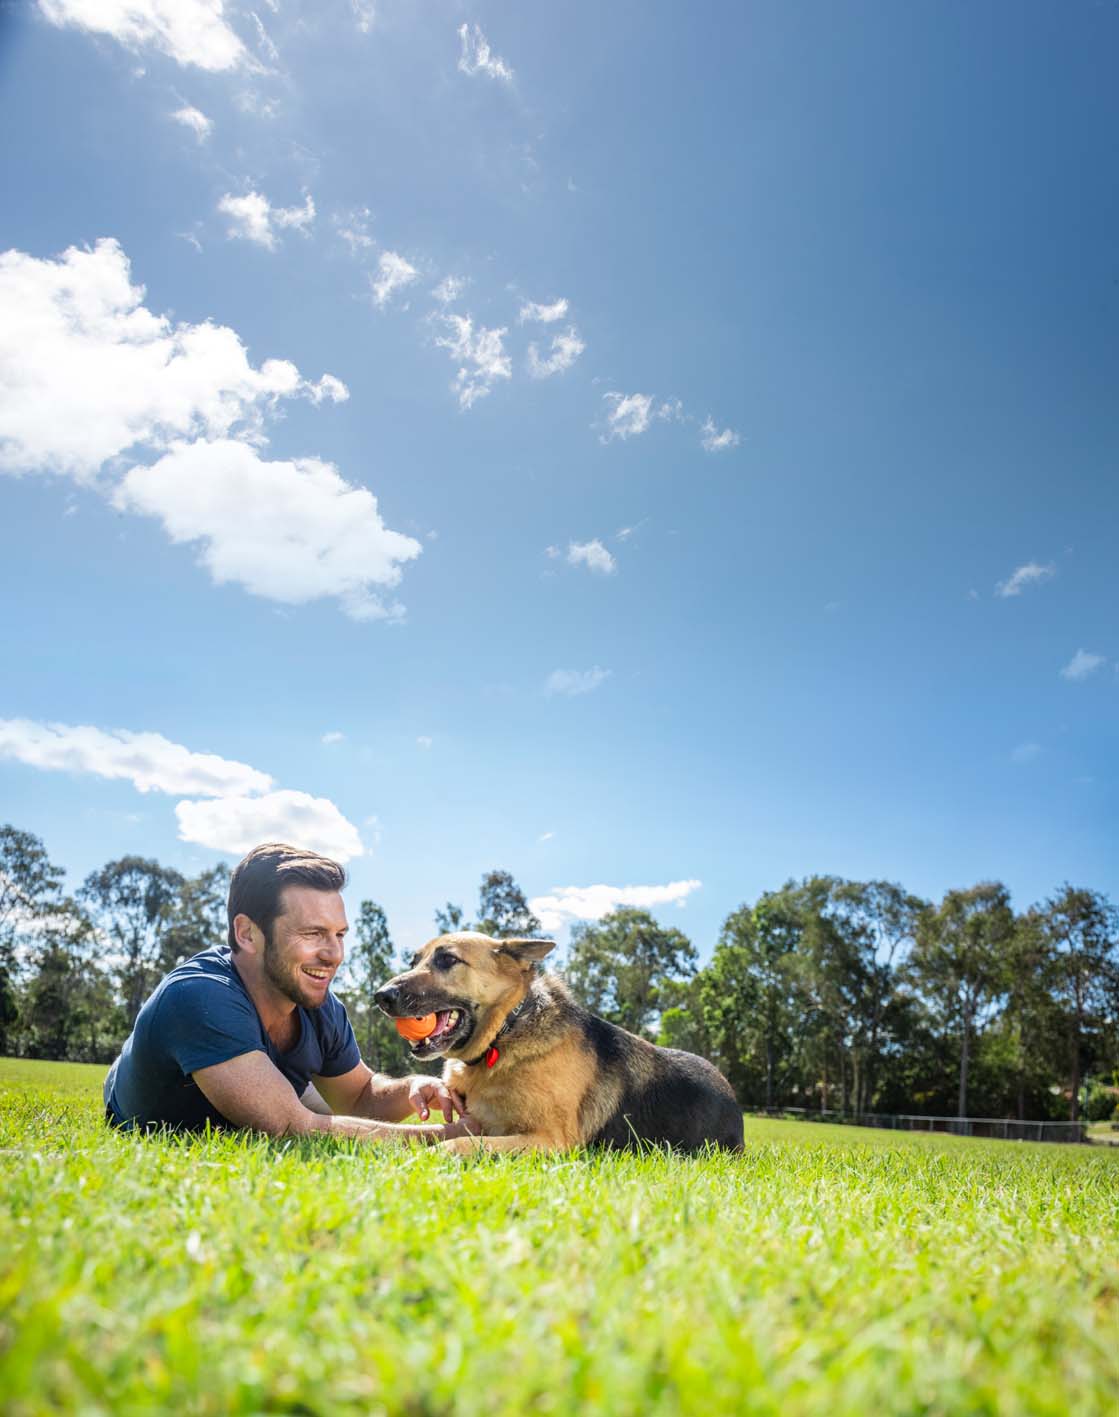 Take your pup to a dog park in Ipswich